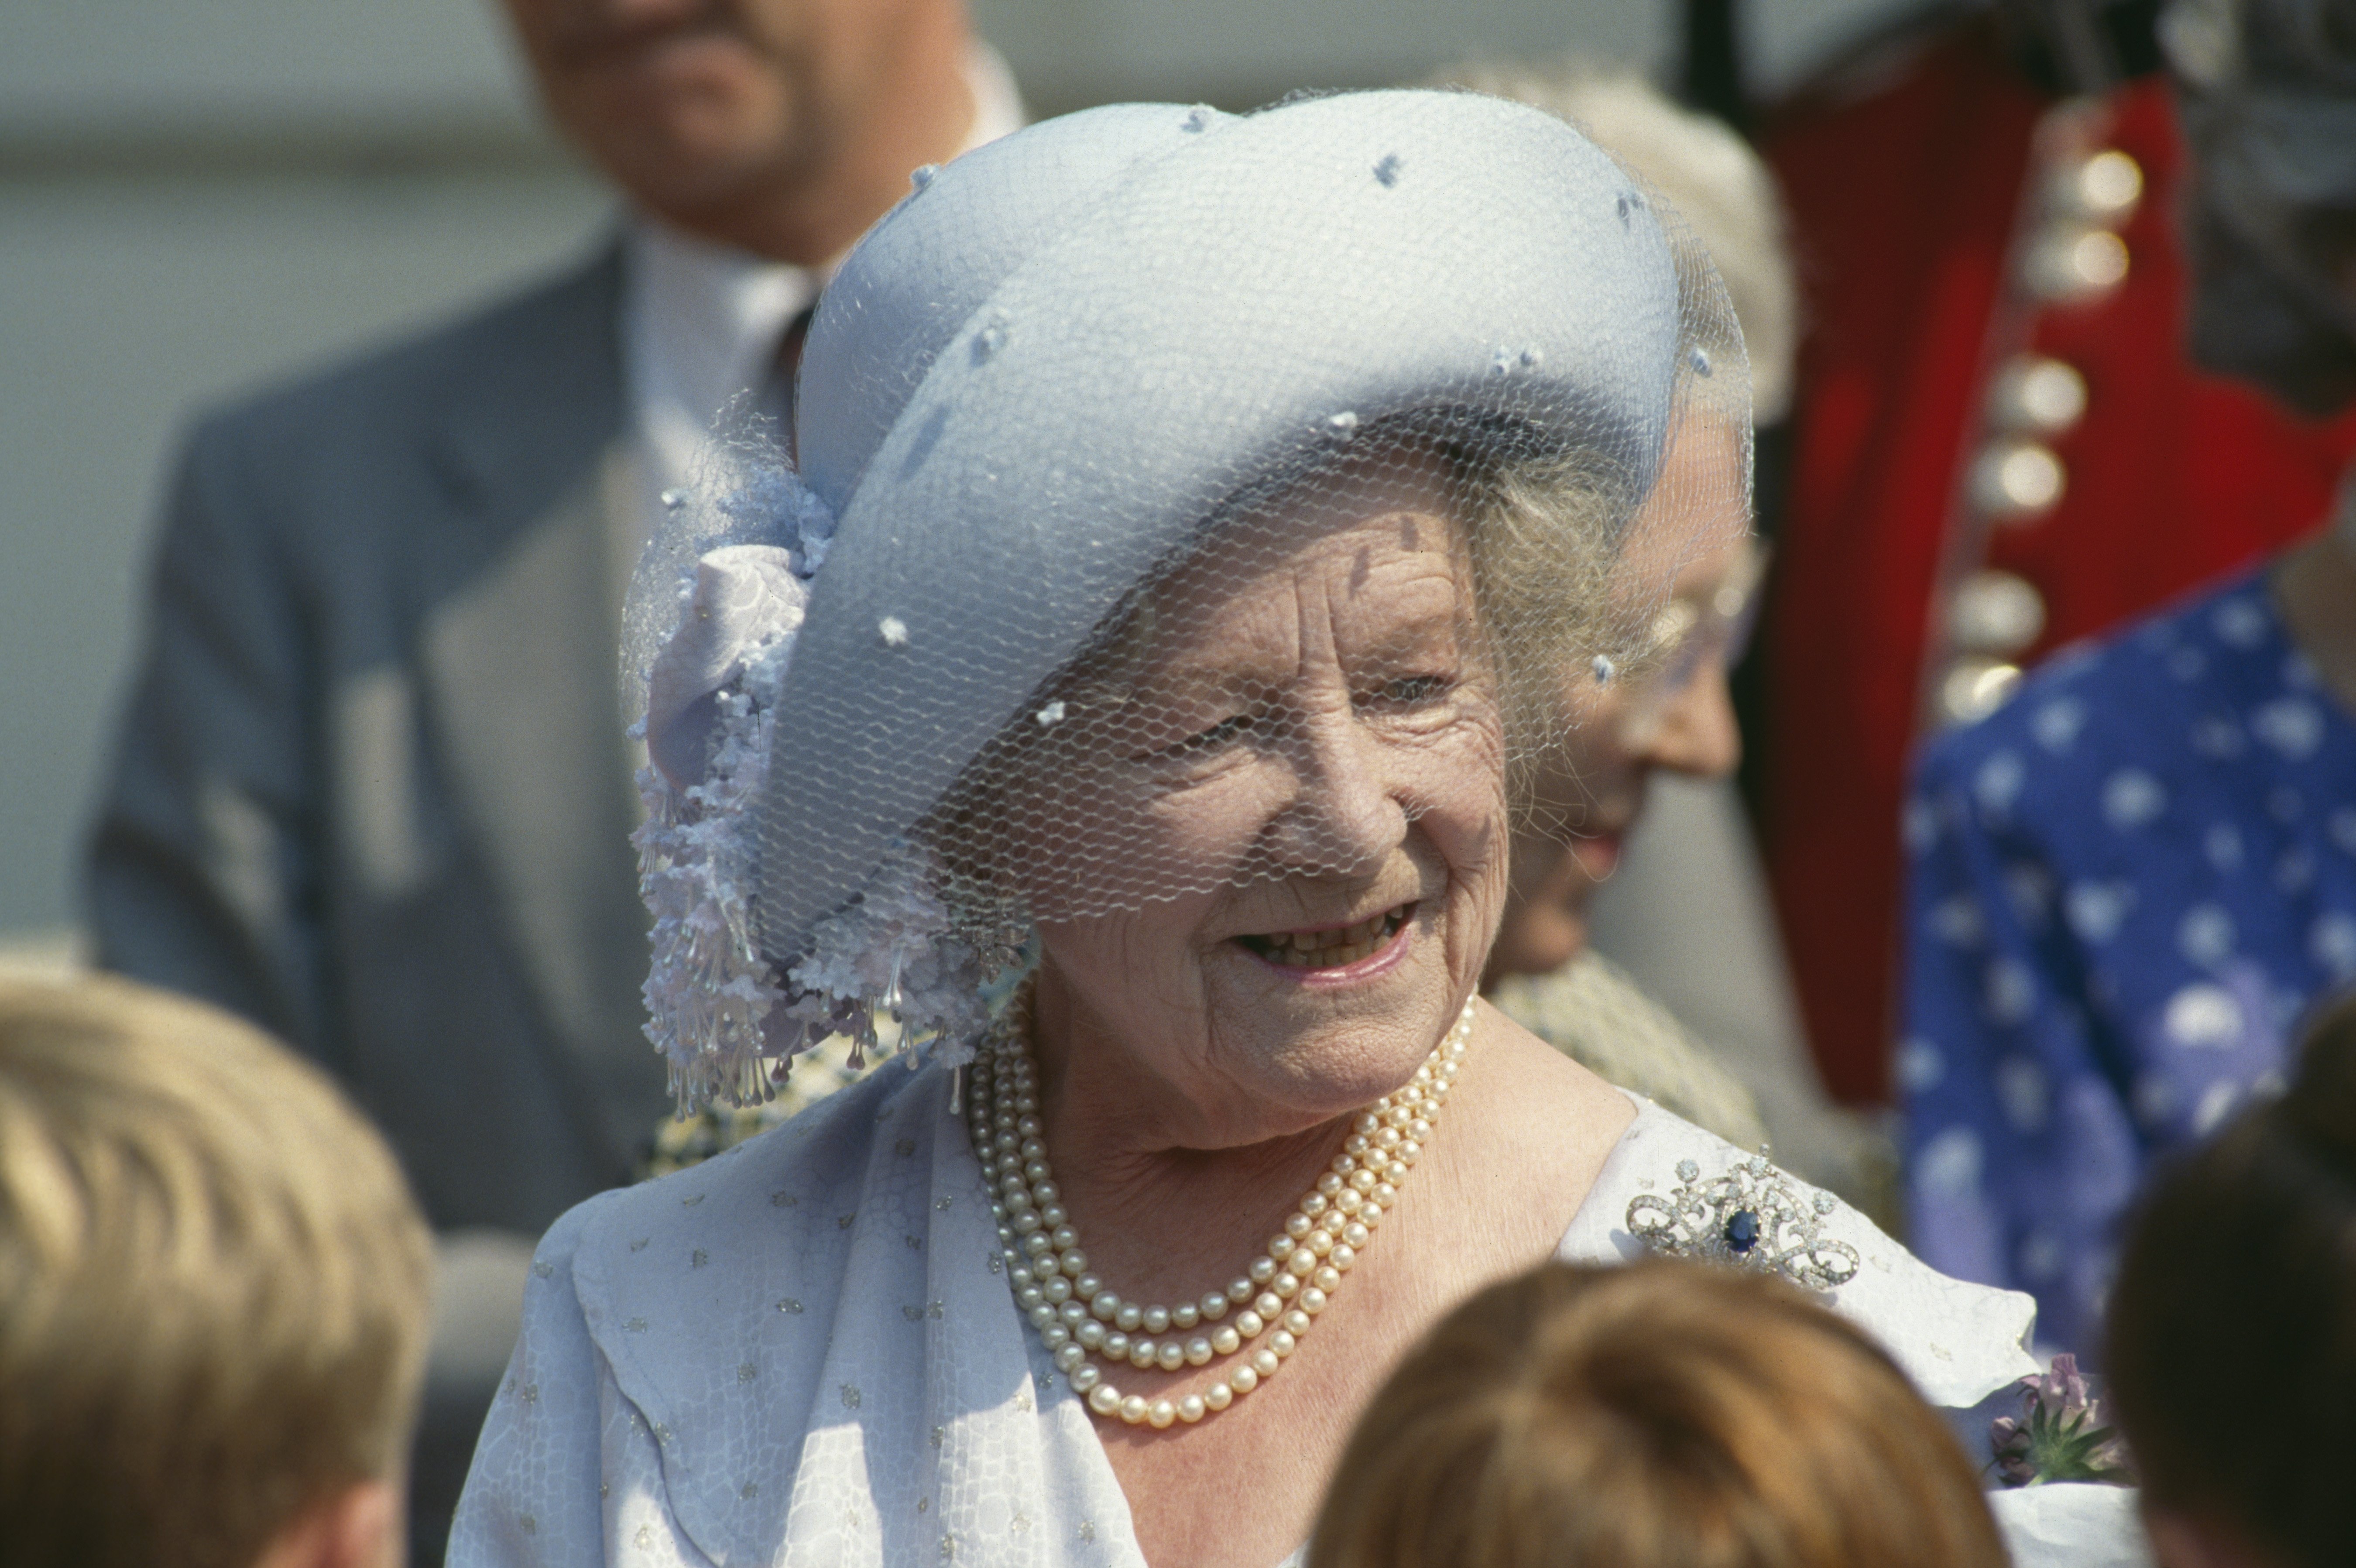 The Queen Mother celebrating her 90th birthday in London, United Kingdom, on August 4, 1990 | Source: Getty Images